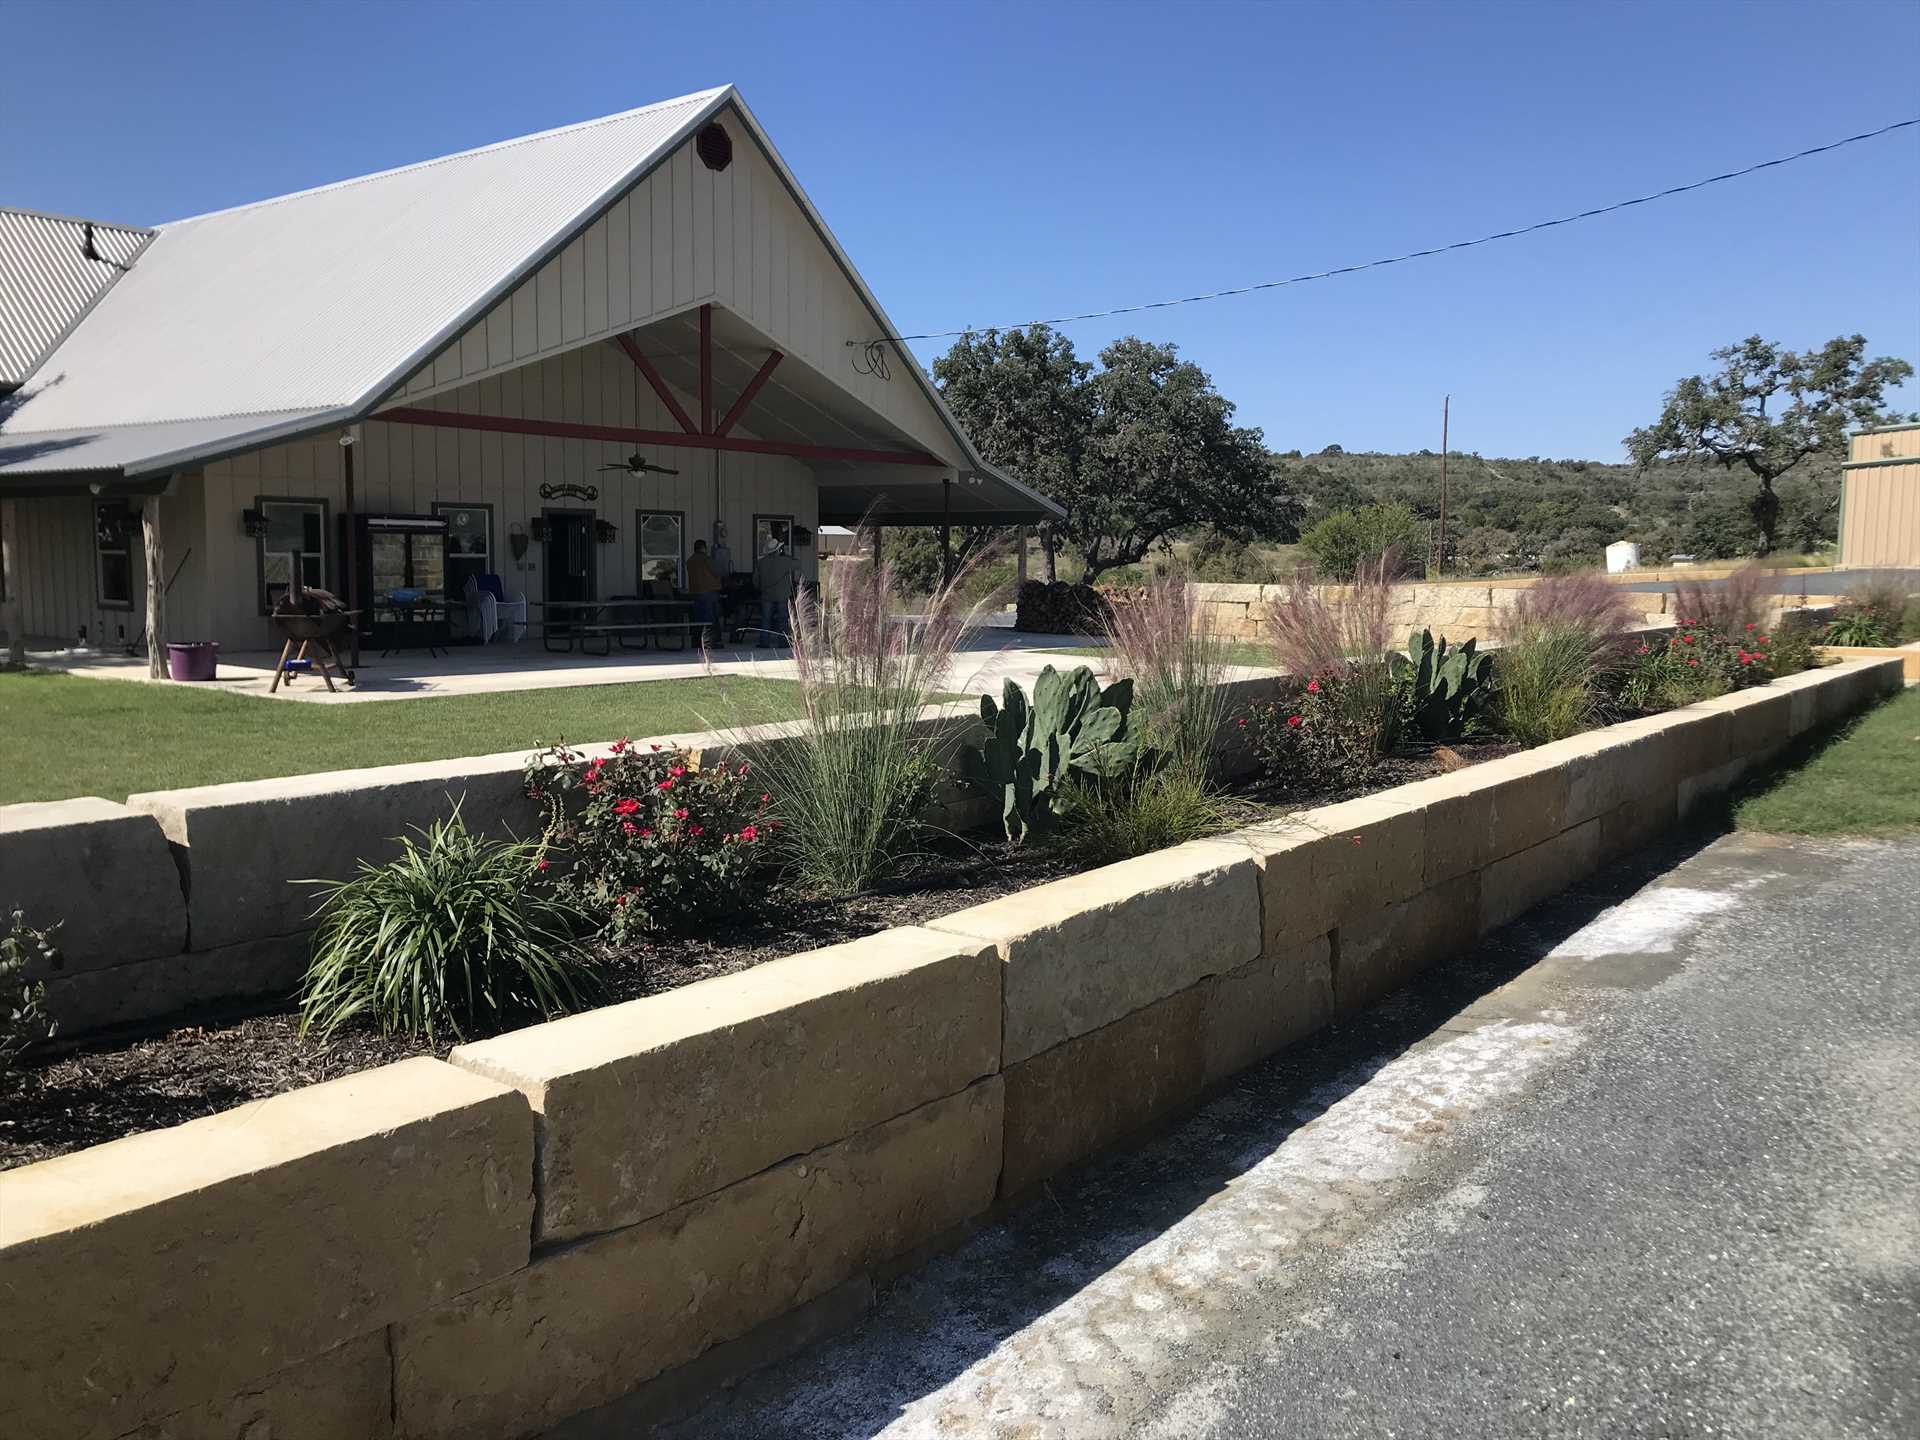                                                 Your crew will love the location, extras, space, and style of the Bluff Springs Lodge. Come make it a Texas-sized part of your Hill Country holiday!